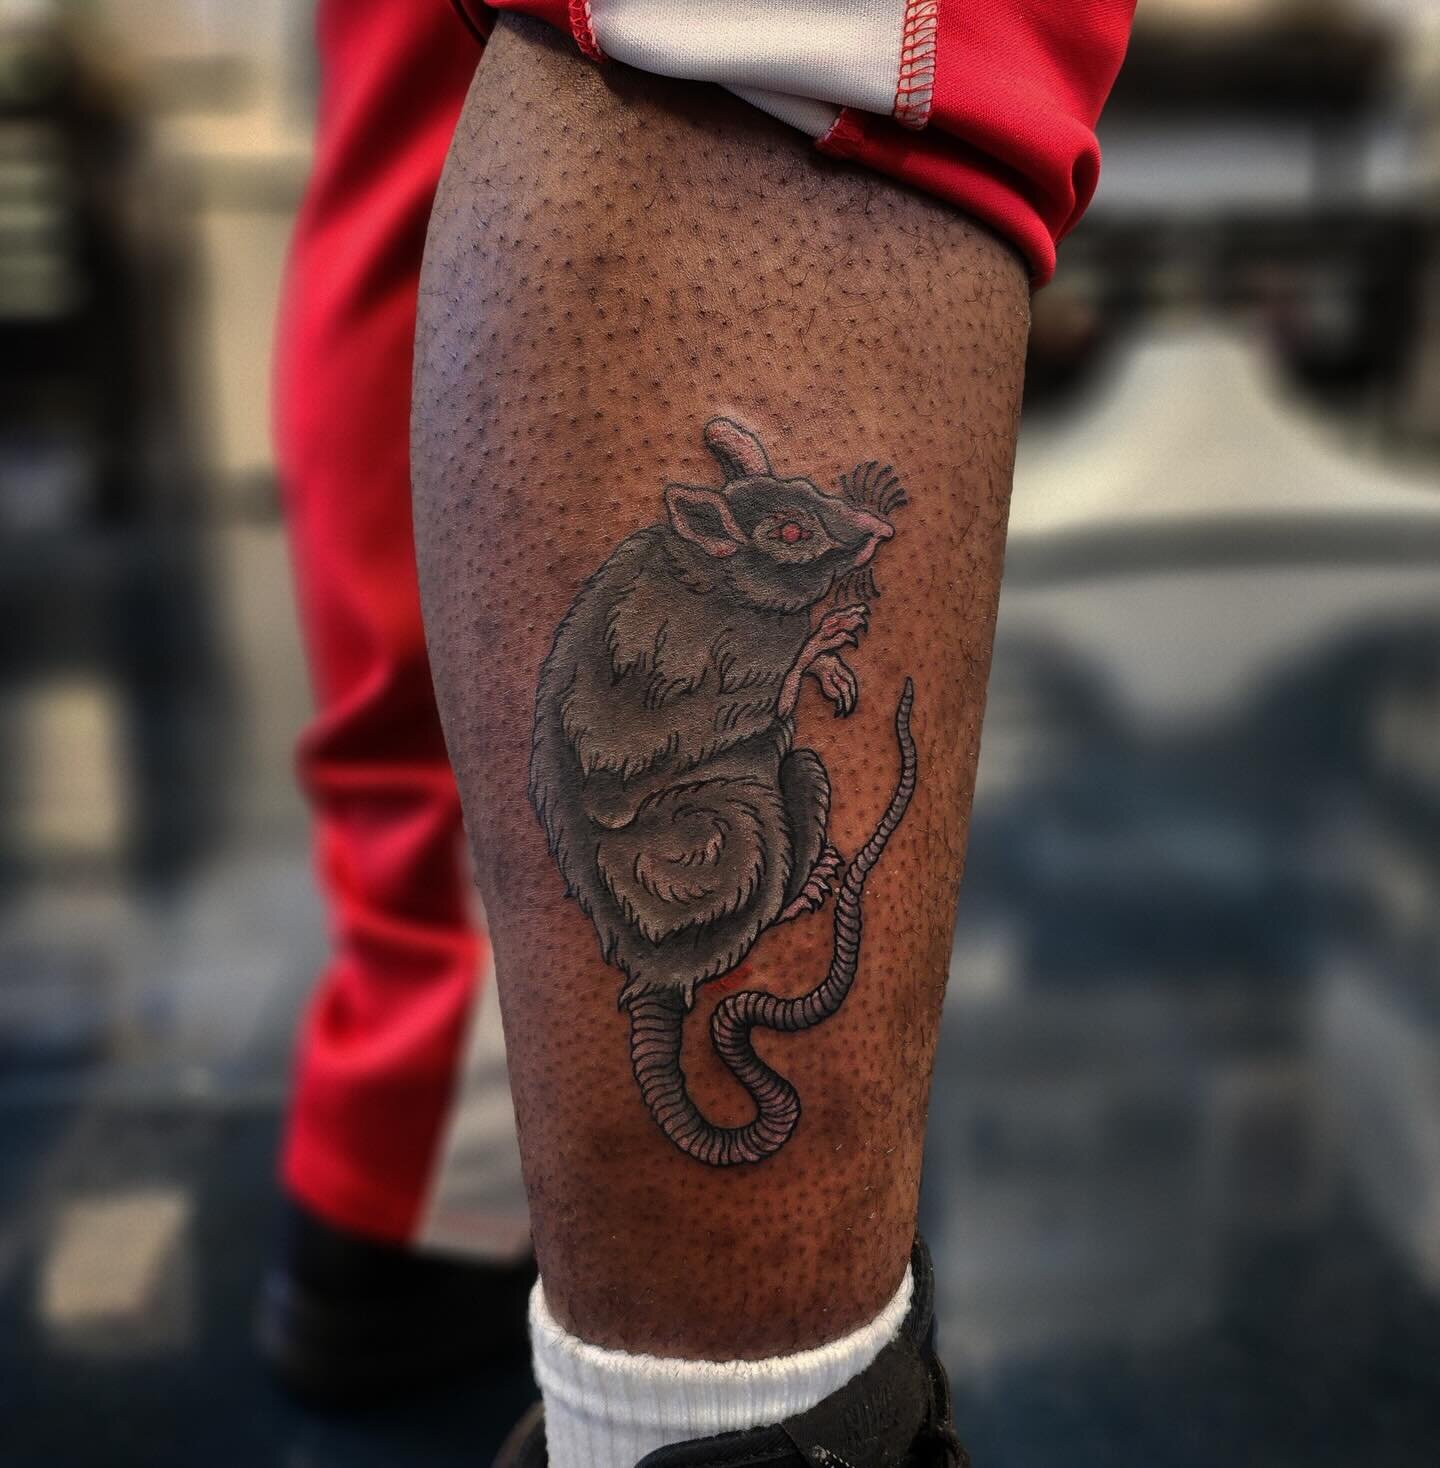 American Trad Rat for Melik 🐀
.
.
.
.
.
#bufordga #americanstyle #americantraditional #tradtattoos #rattattoo